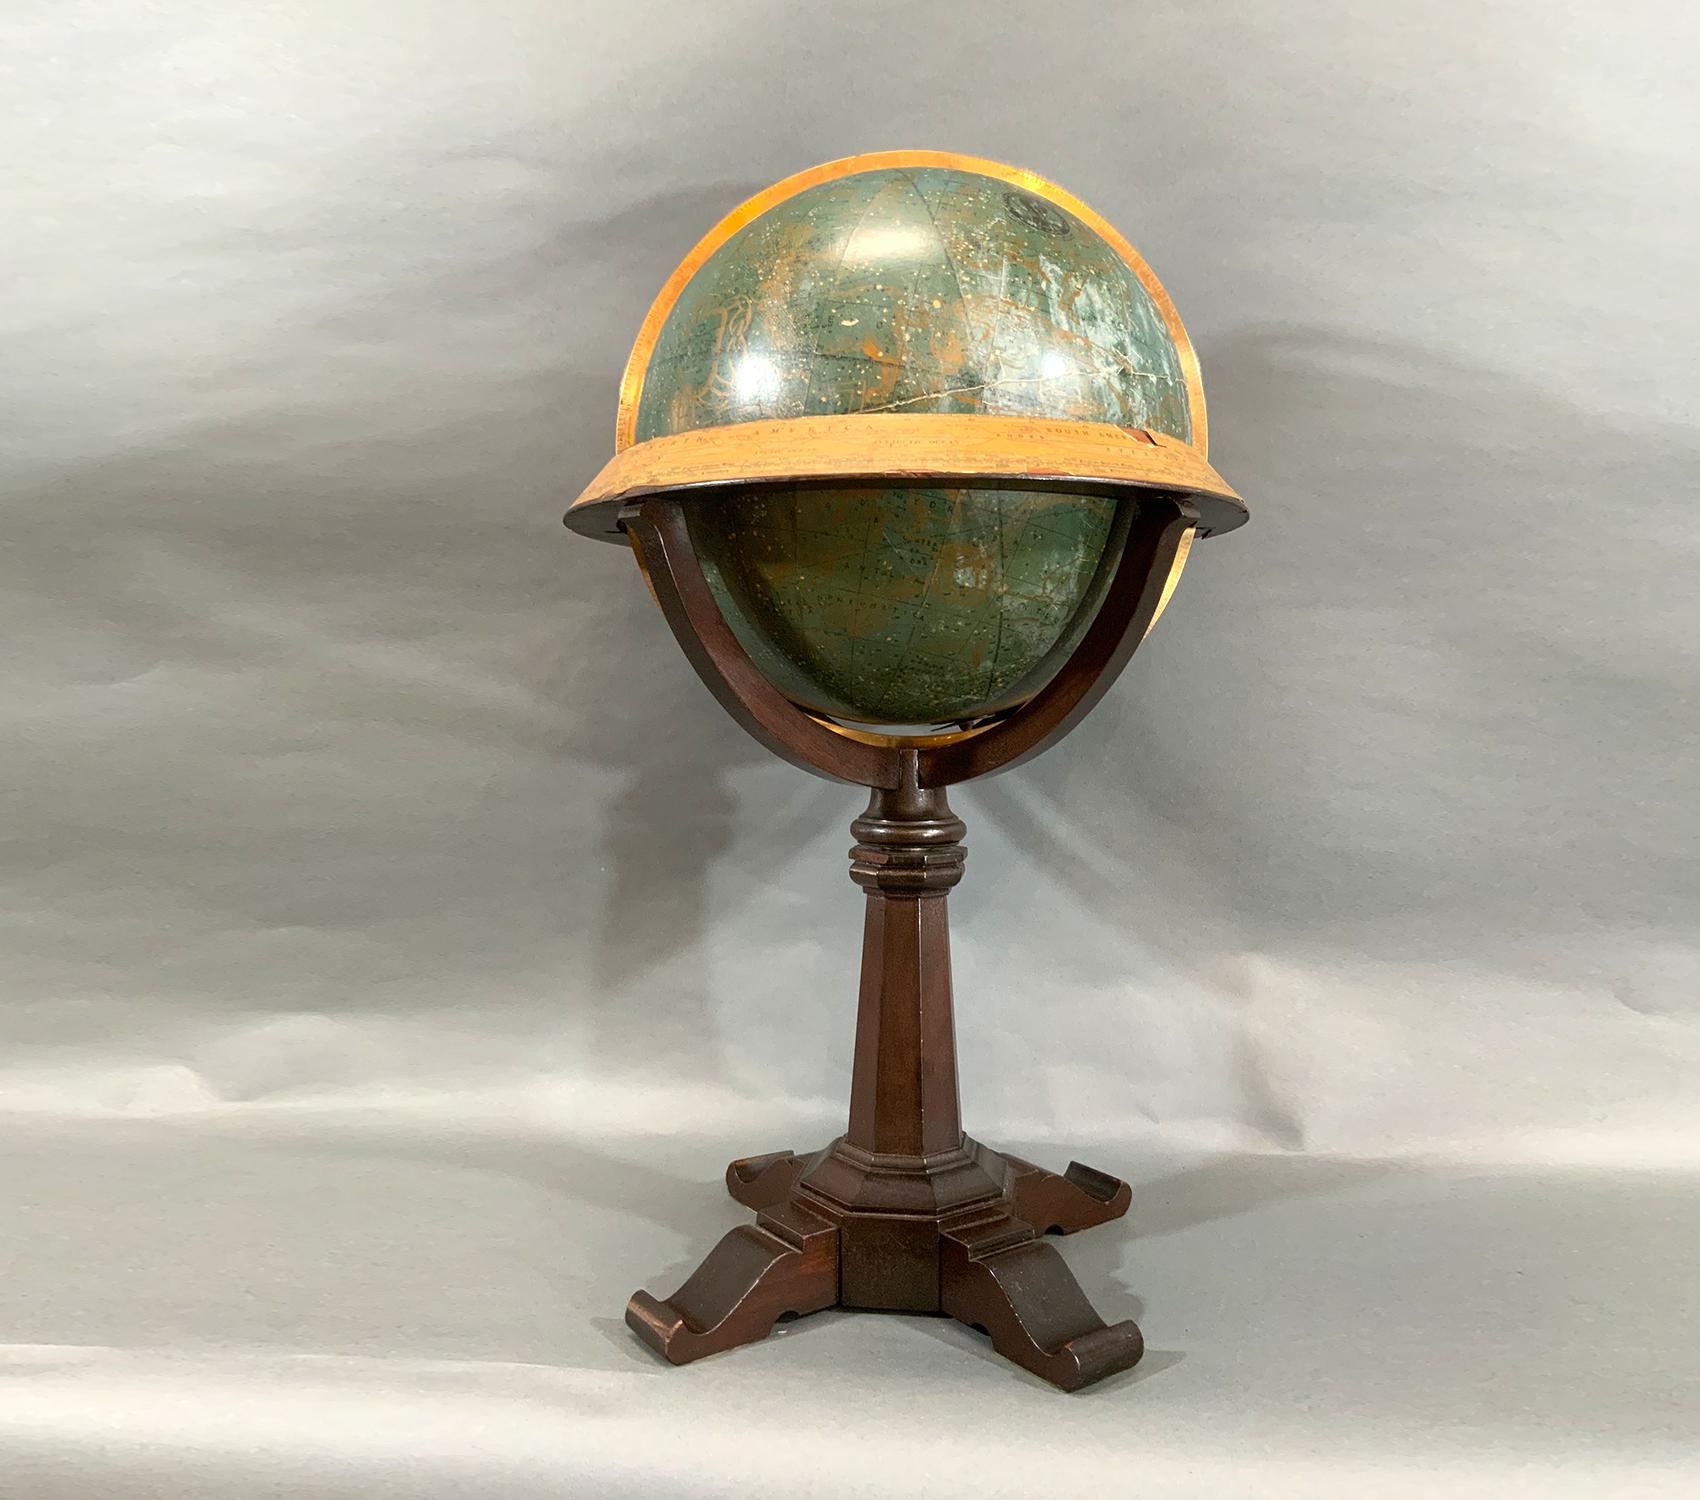 Fine library globe with makers logo from Atlas School Supply Co., Chicago. Hardwood base with rich finish and nice detail. Celestial globe with equatorial ring. Showing zodiac markings.

Weight: 7 LBS
Overall Dimensions: 26